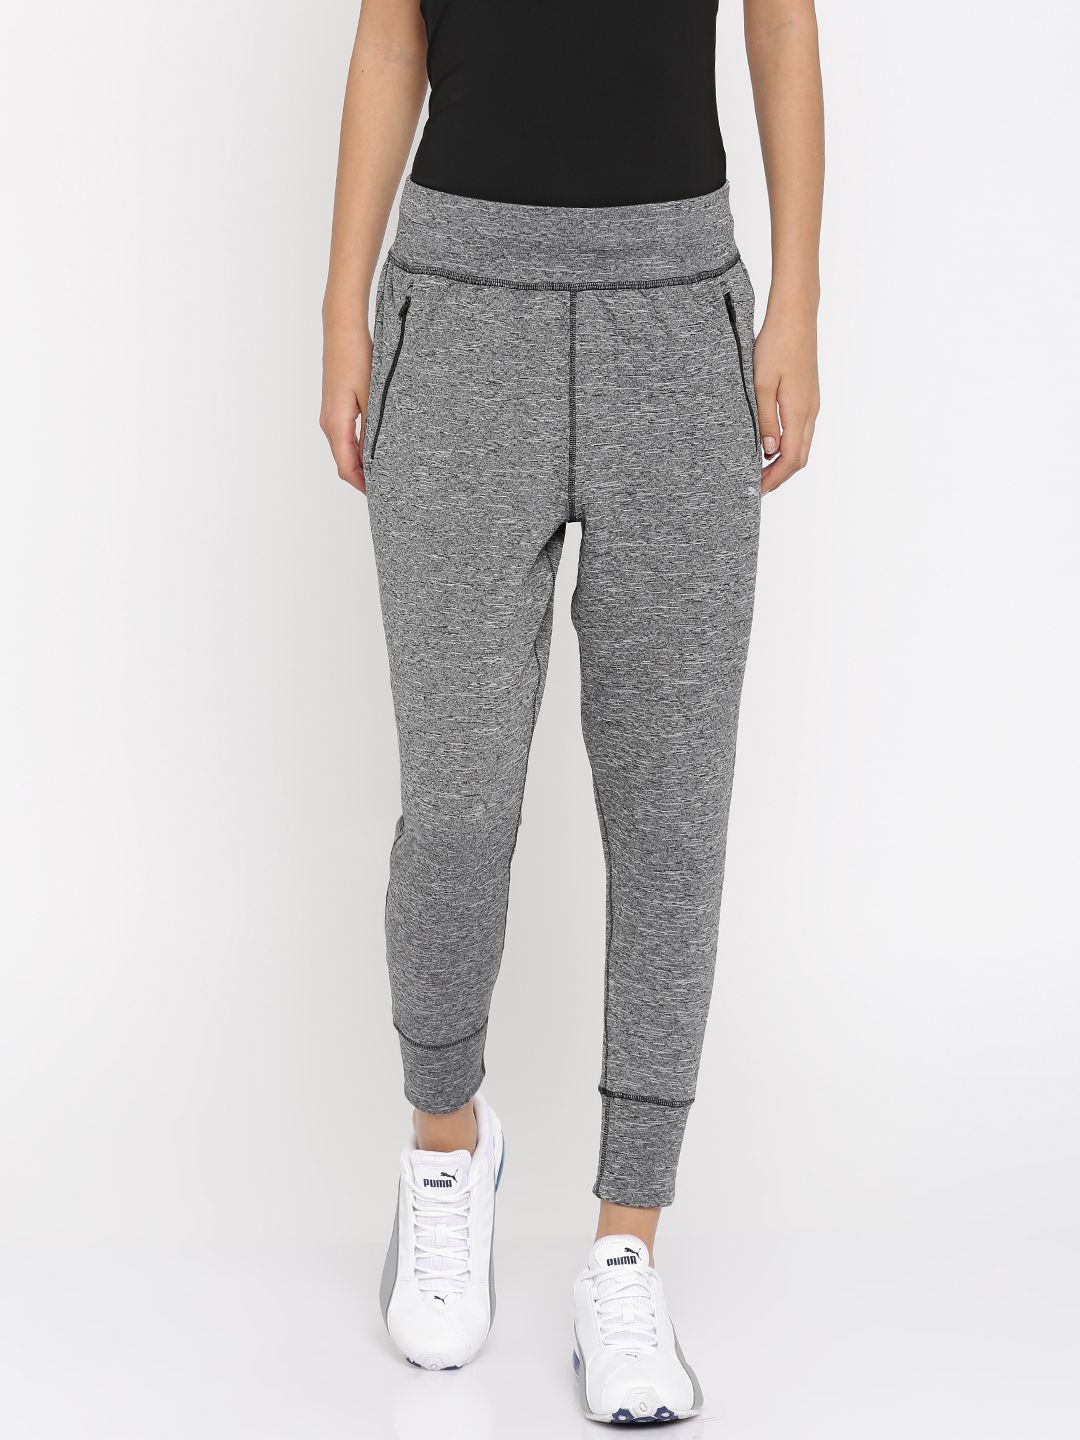 Puma Grey Nocturnal Winterized Jogger Price in India